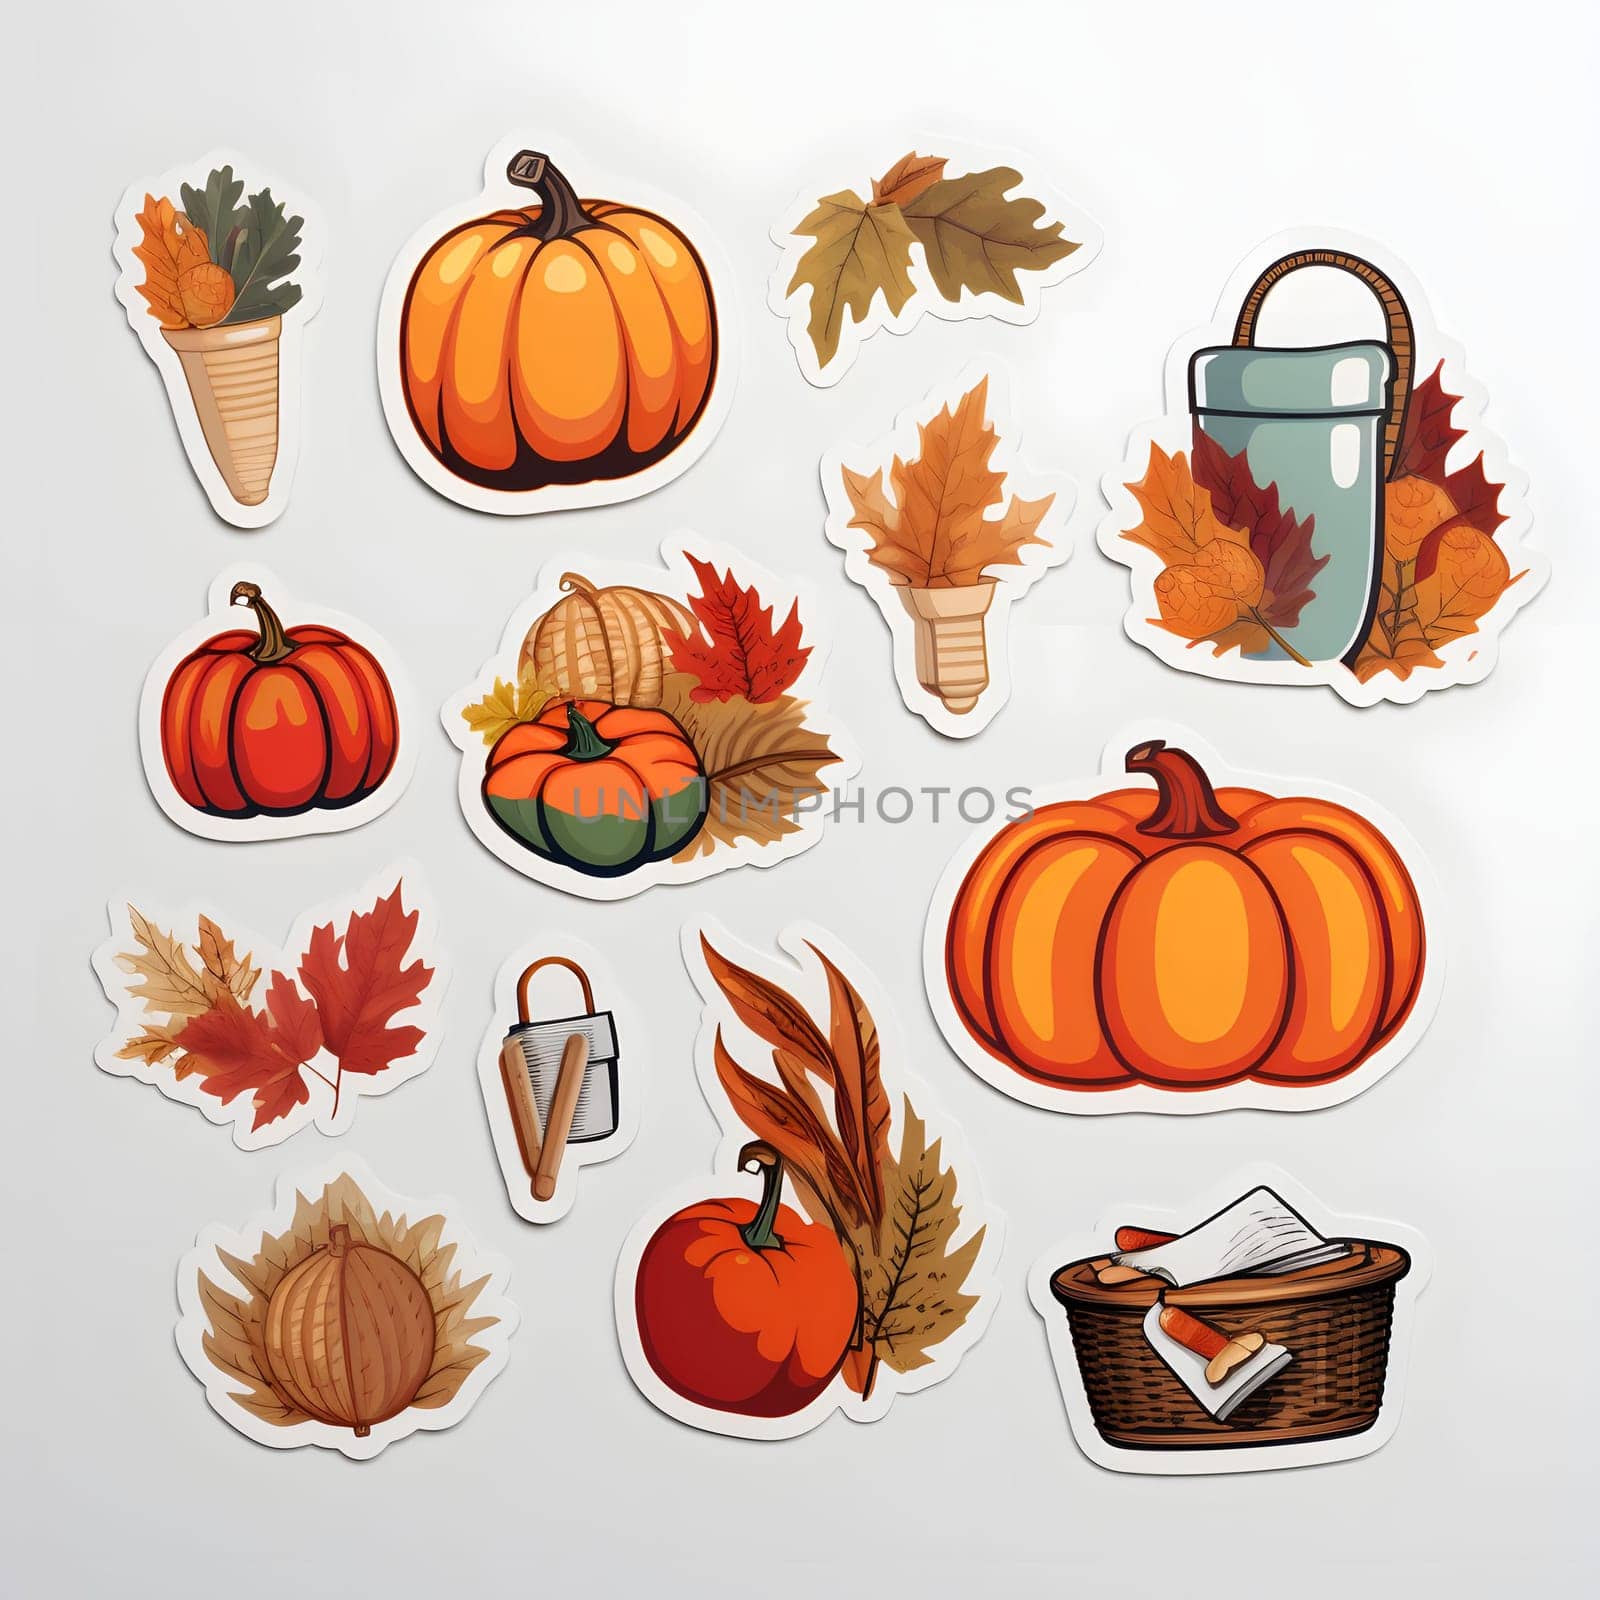 Stickers related to the Thanksgiving holiday, Turkey, Pumpkins. Pumpkin as a dish of thanksgiving for the harvest, picture on a white isolated background. An atmosphere of joy and celebration.